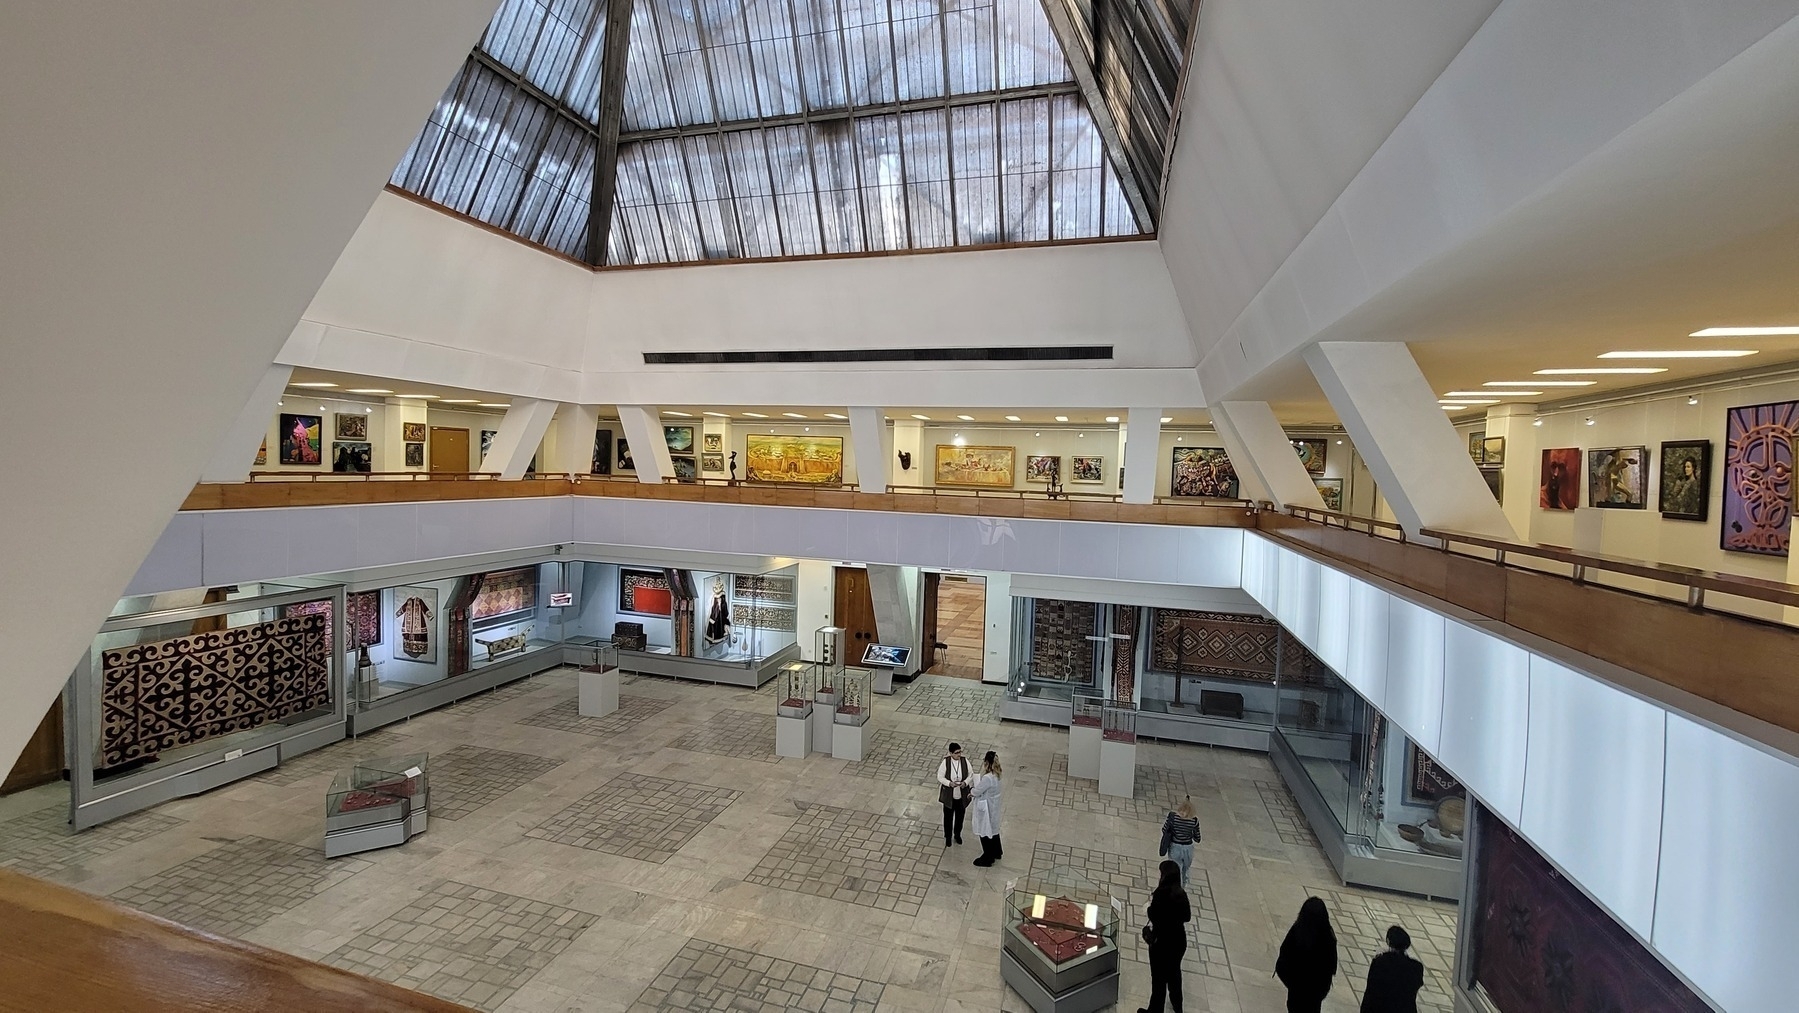 view of two floors of a museum atrium, taken from the higher floor